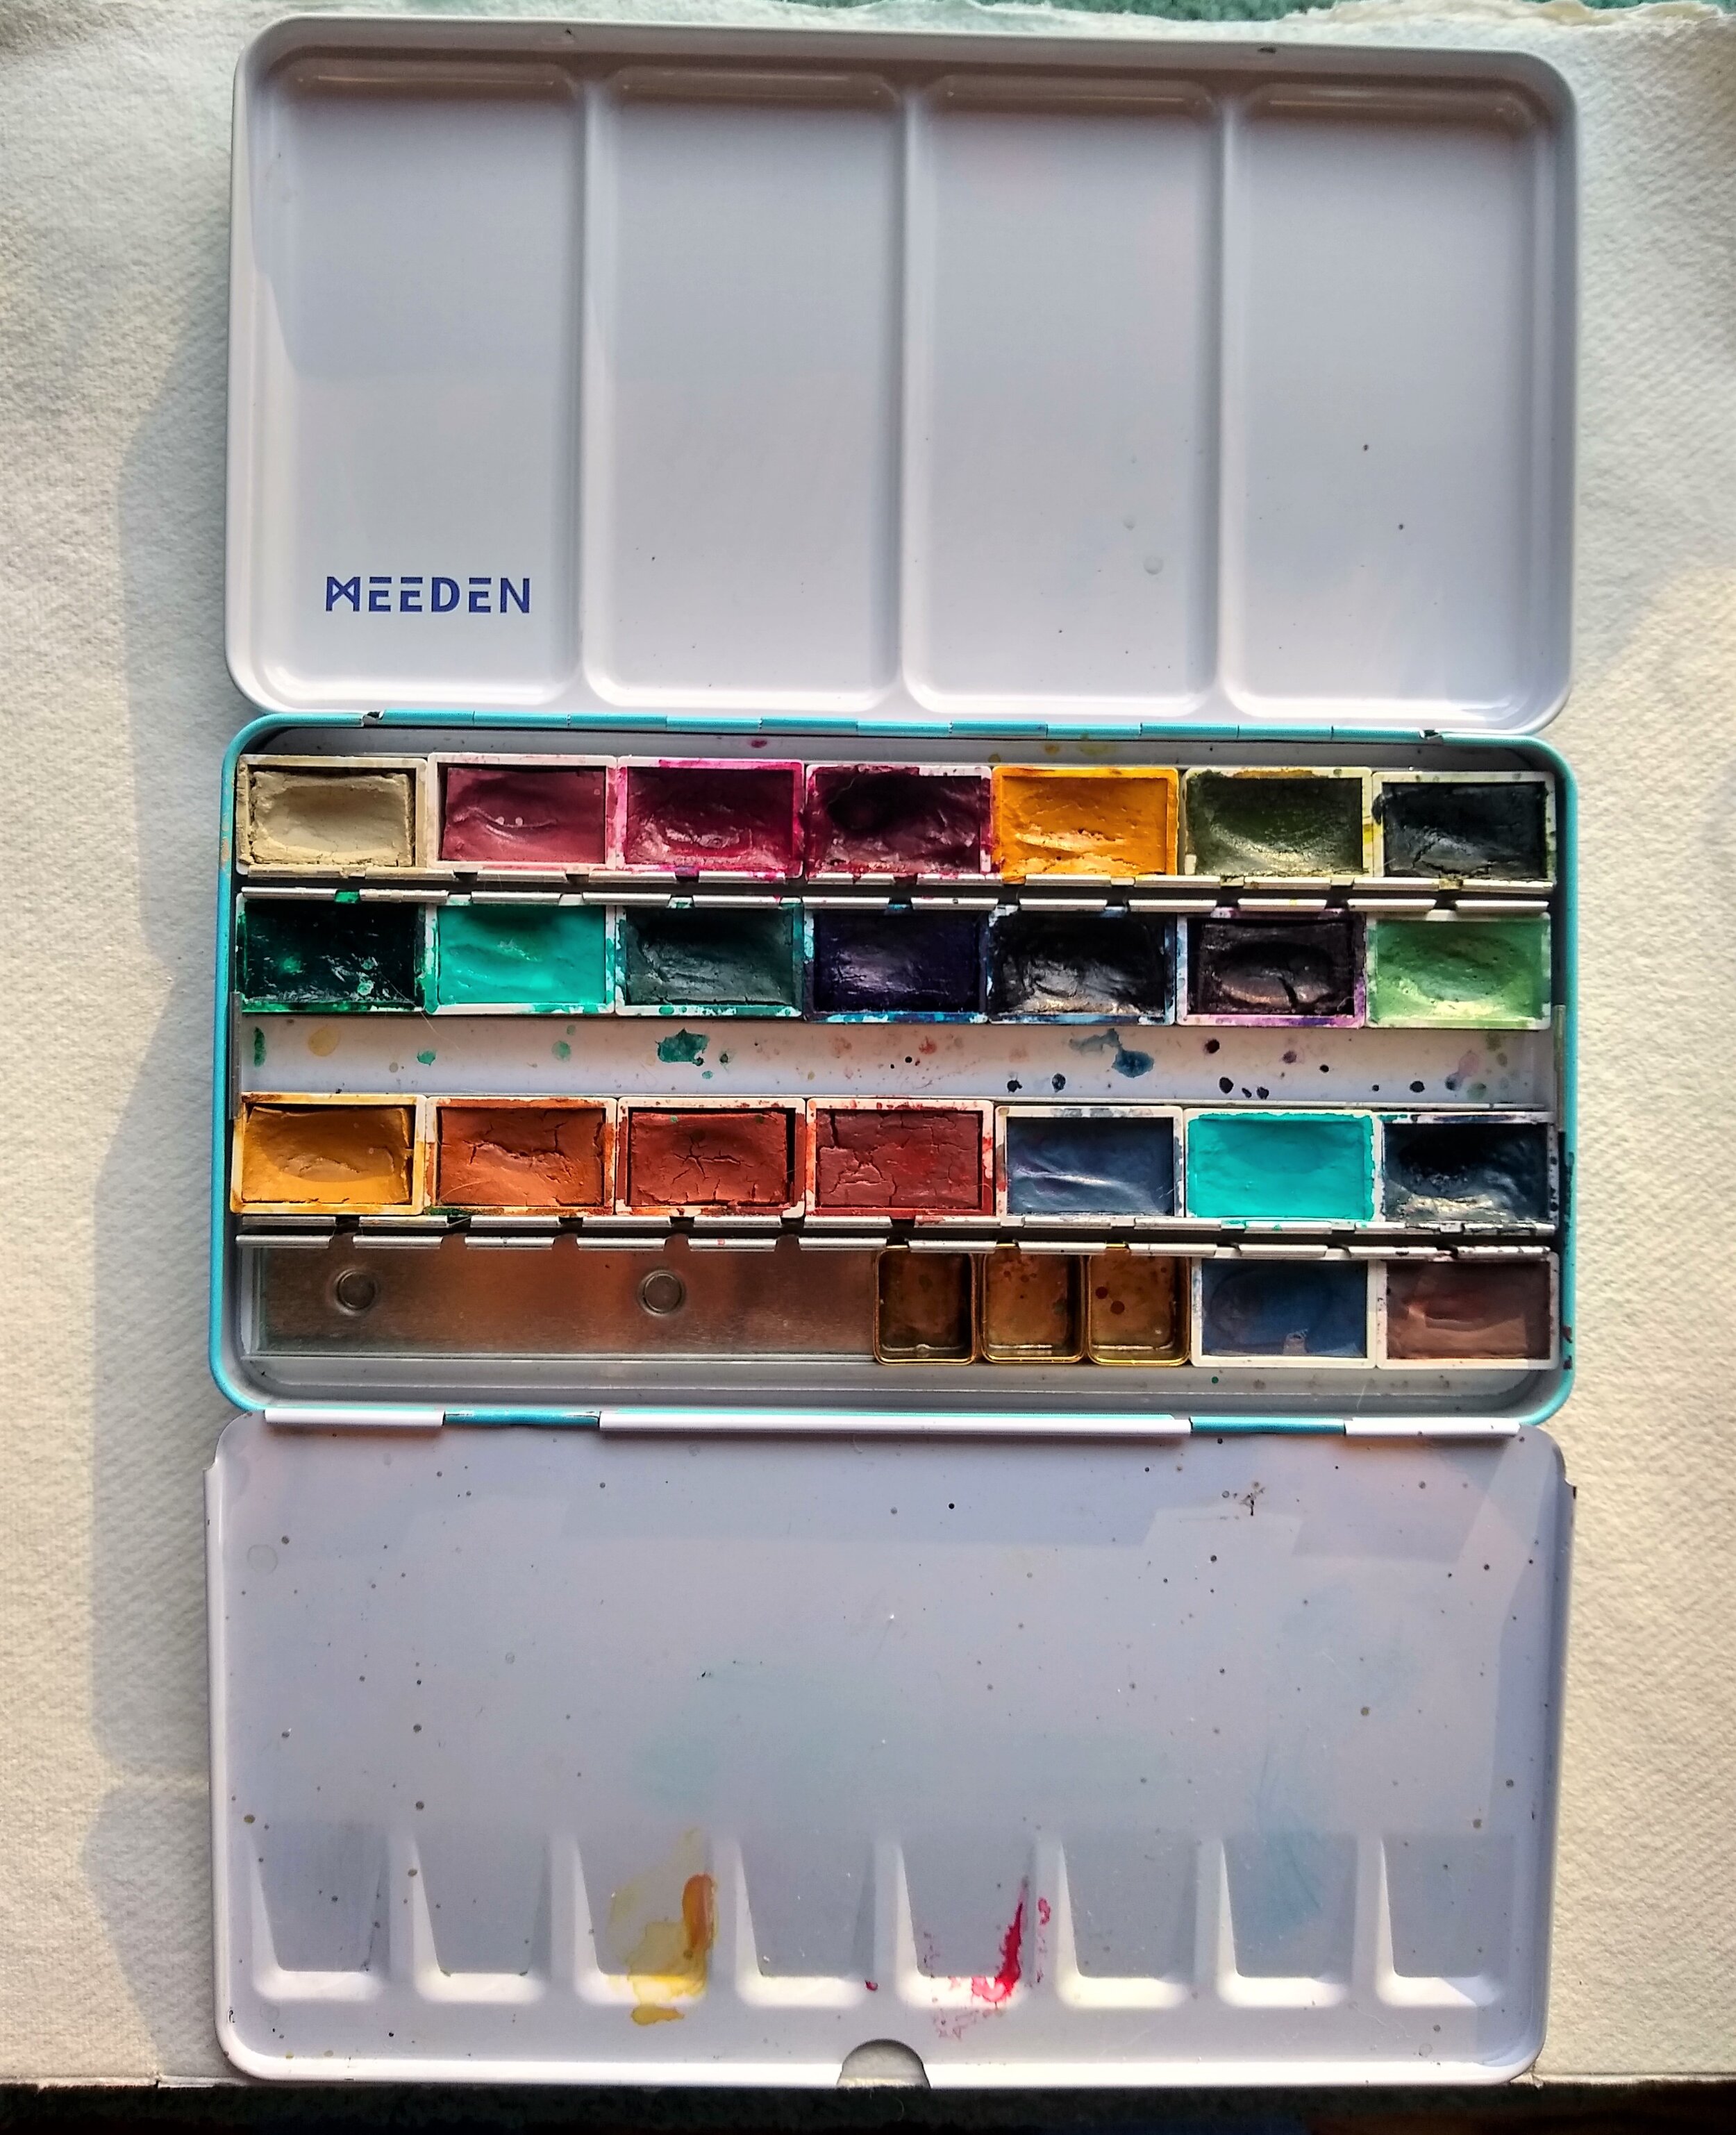 The Pallets Strike Back: Round Two of my Pallet Review — Art Over Easy